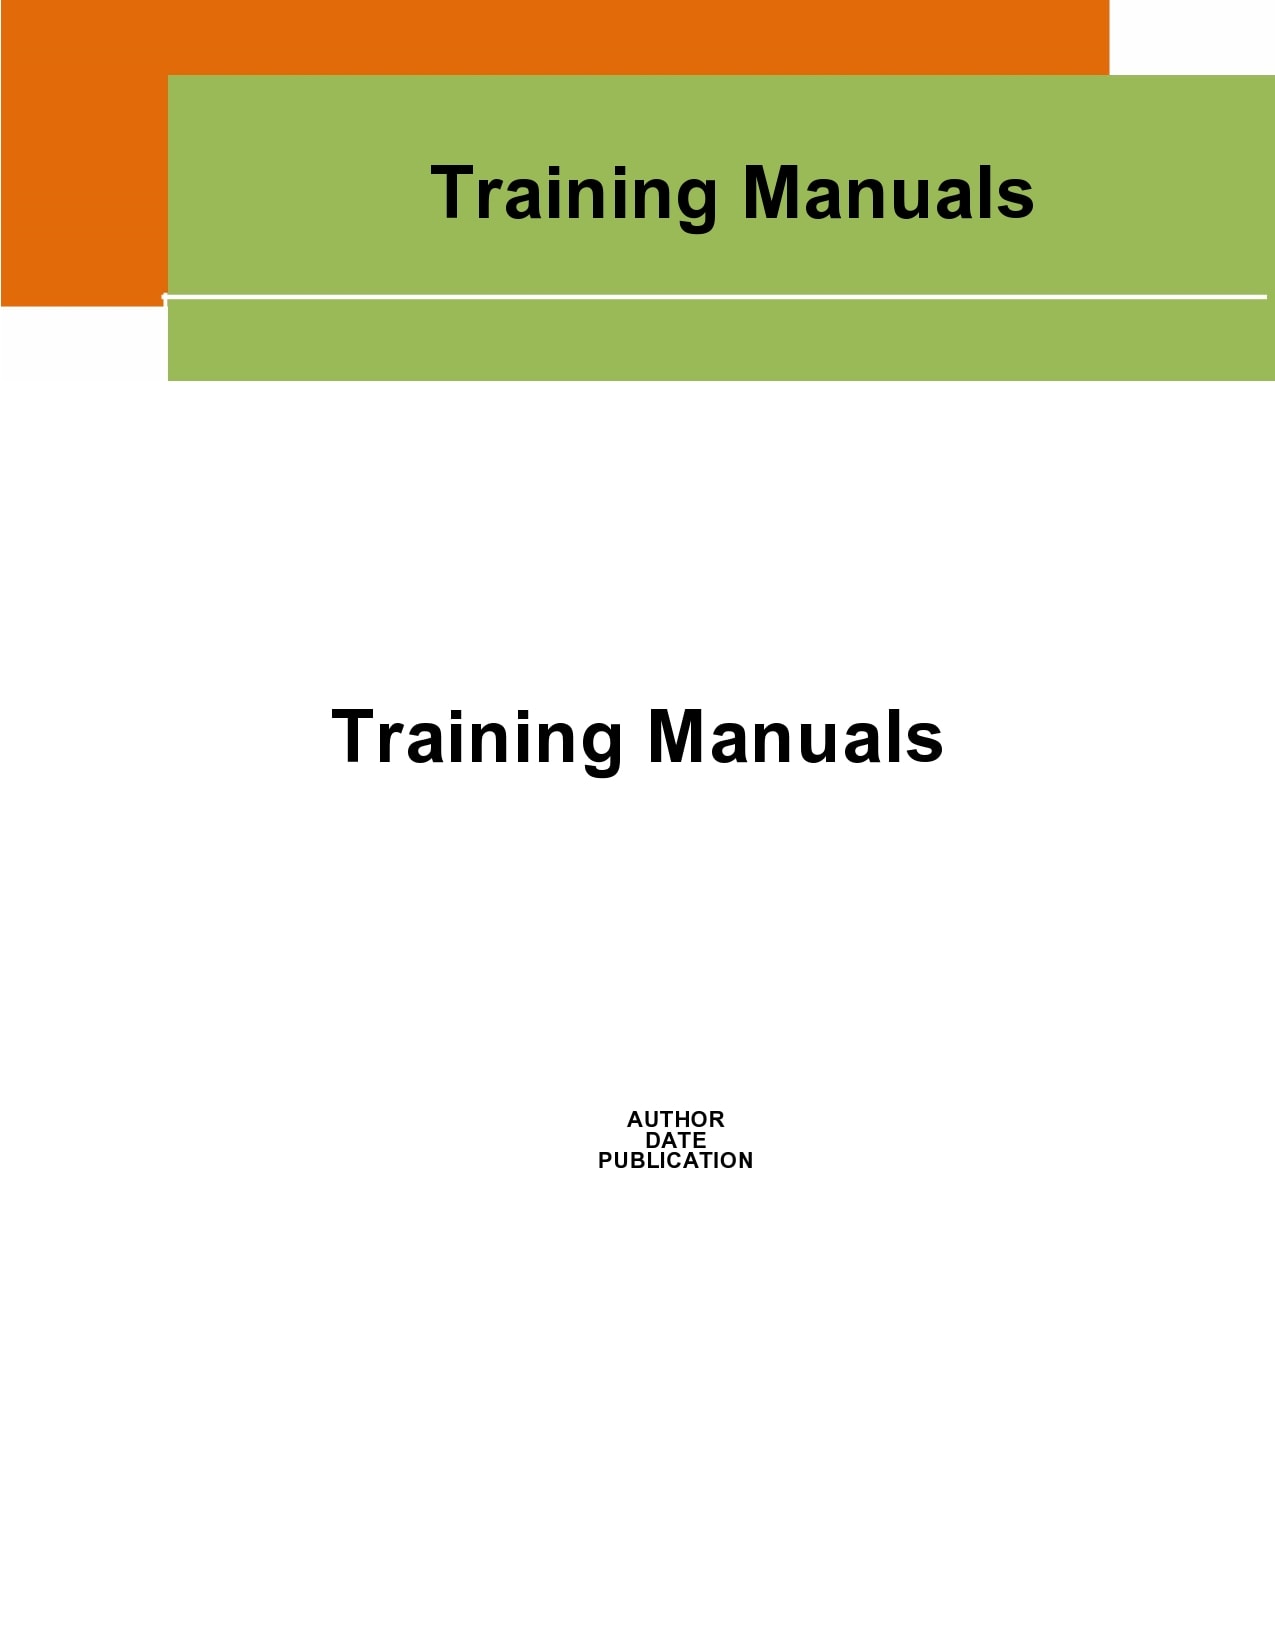 20 Best Training Manual Templates (+Examples) - TemplateArchive With Regard To Training Documentation Template Word